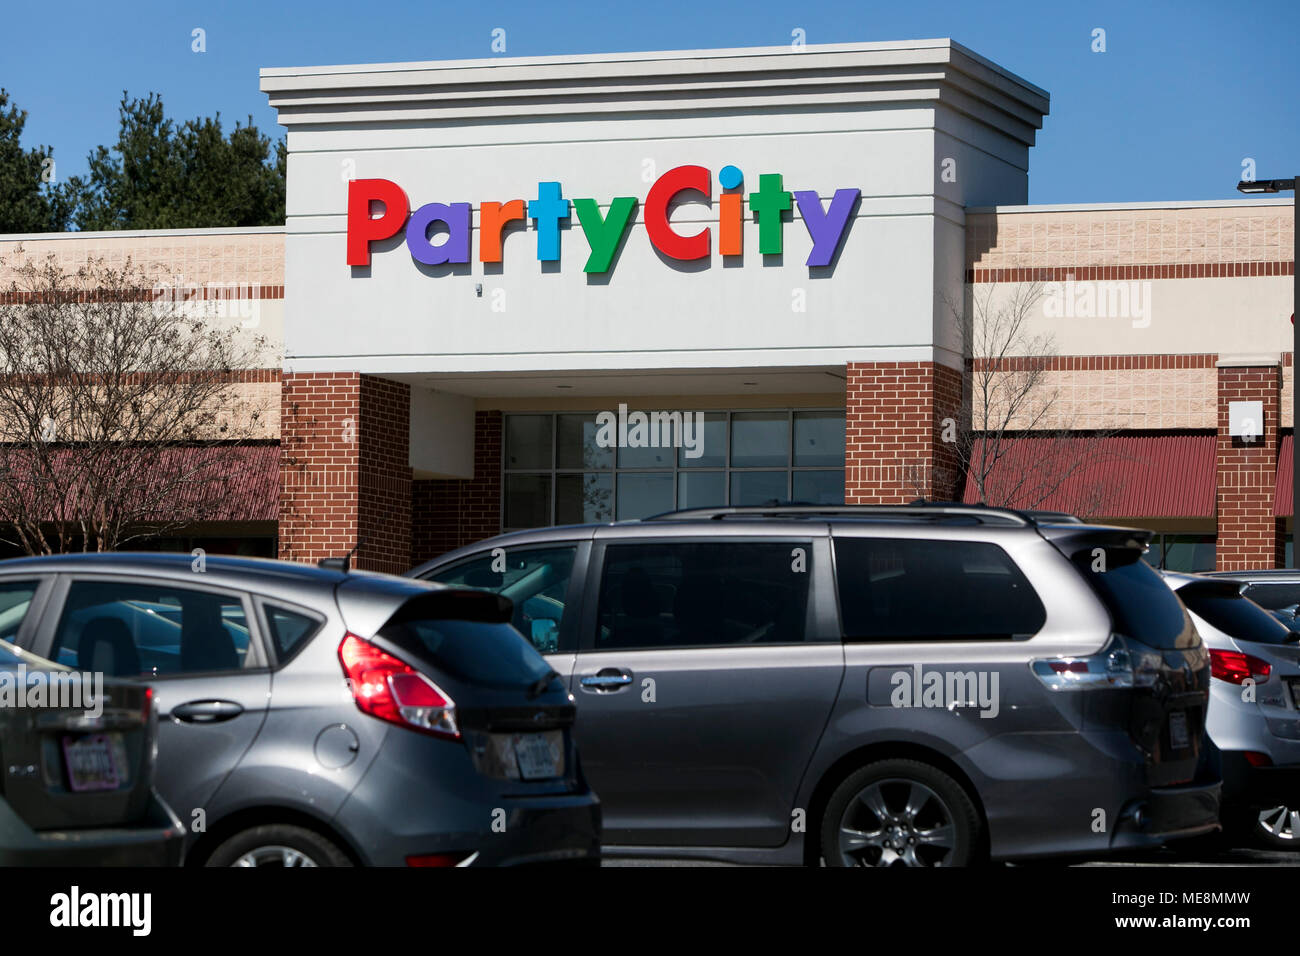 A logo sign outside of a Party City retail store location in Columbia, Maryland on April 20, 2018. Stock Photo